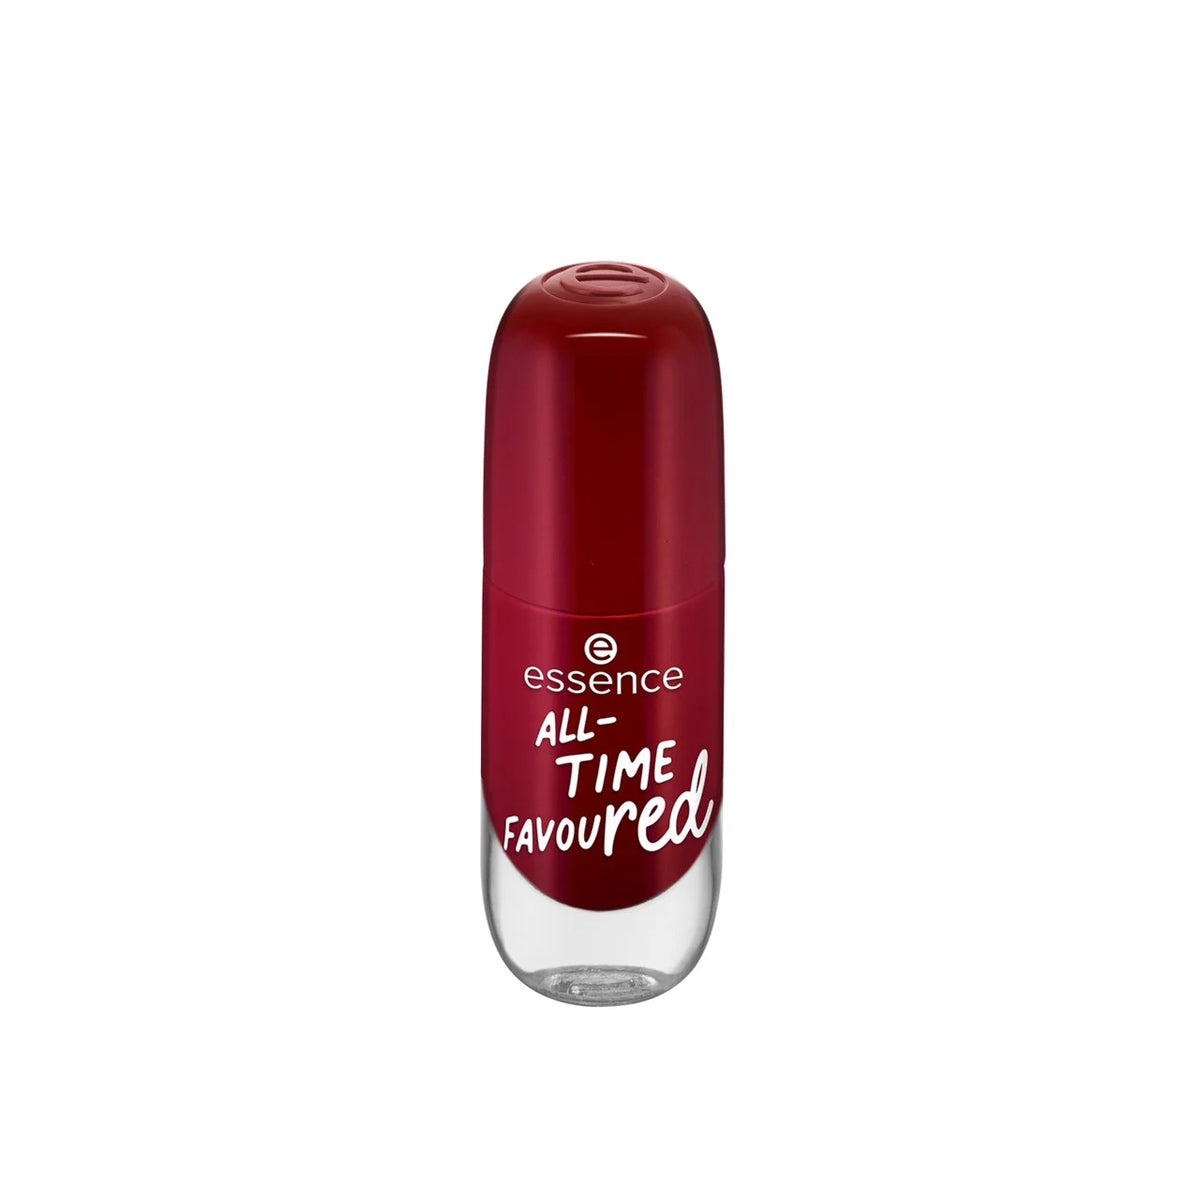 Essence Gel Nail Colour - 14 All Time Favoured